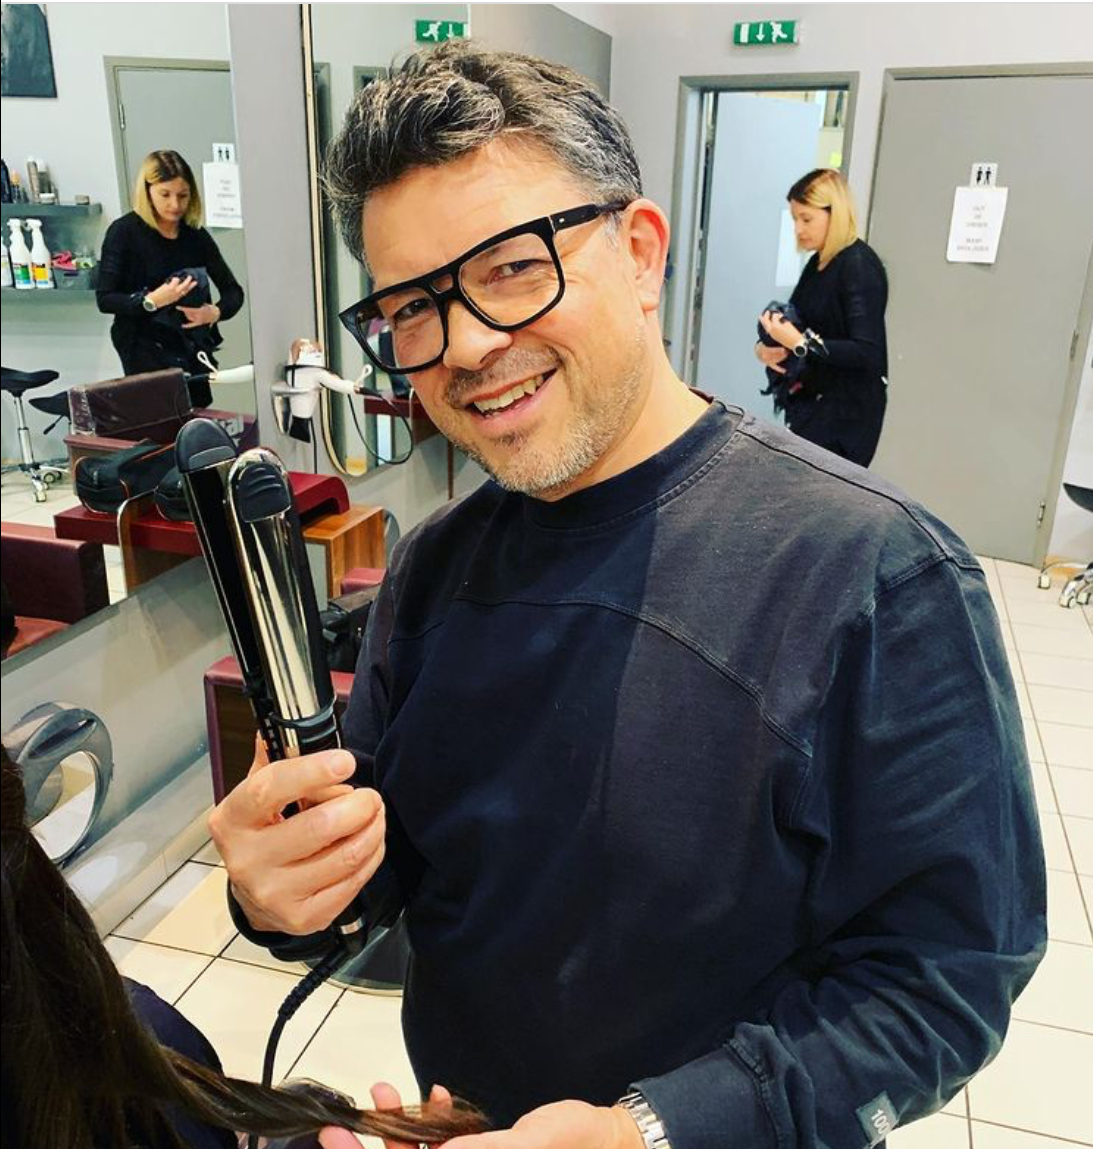 Kai - Loving these beauties from Babyliss Pro! They simply glide through the hair and have some really cool design features that make them a joy to use for an array of different styling techniques. #haircare #peterboroughsalon #peterboroughuk #pkaihair #babylisspro #wellauk